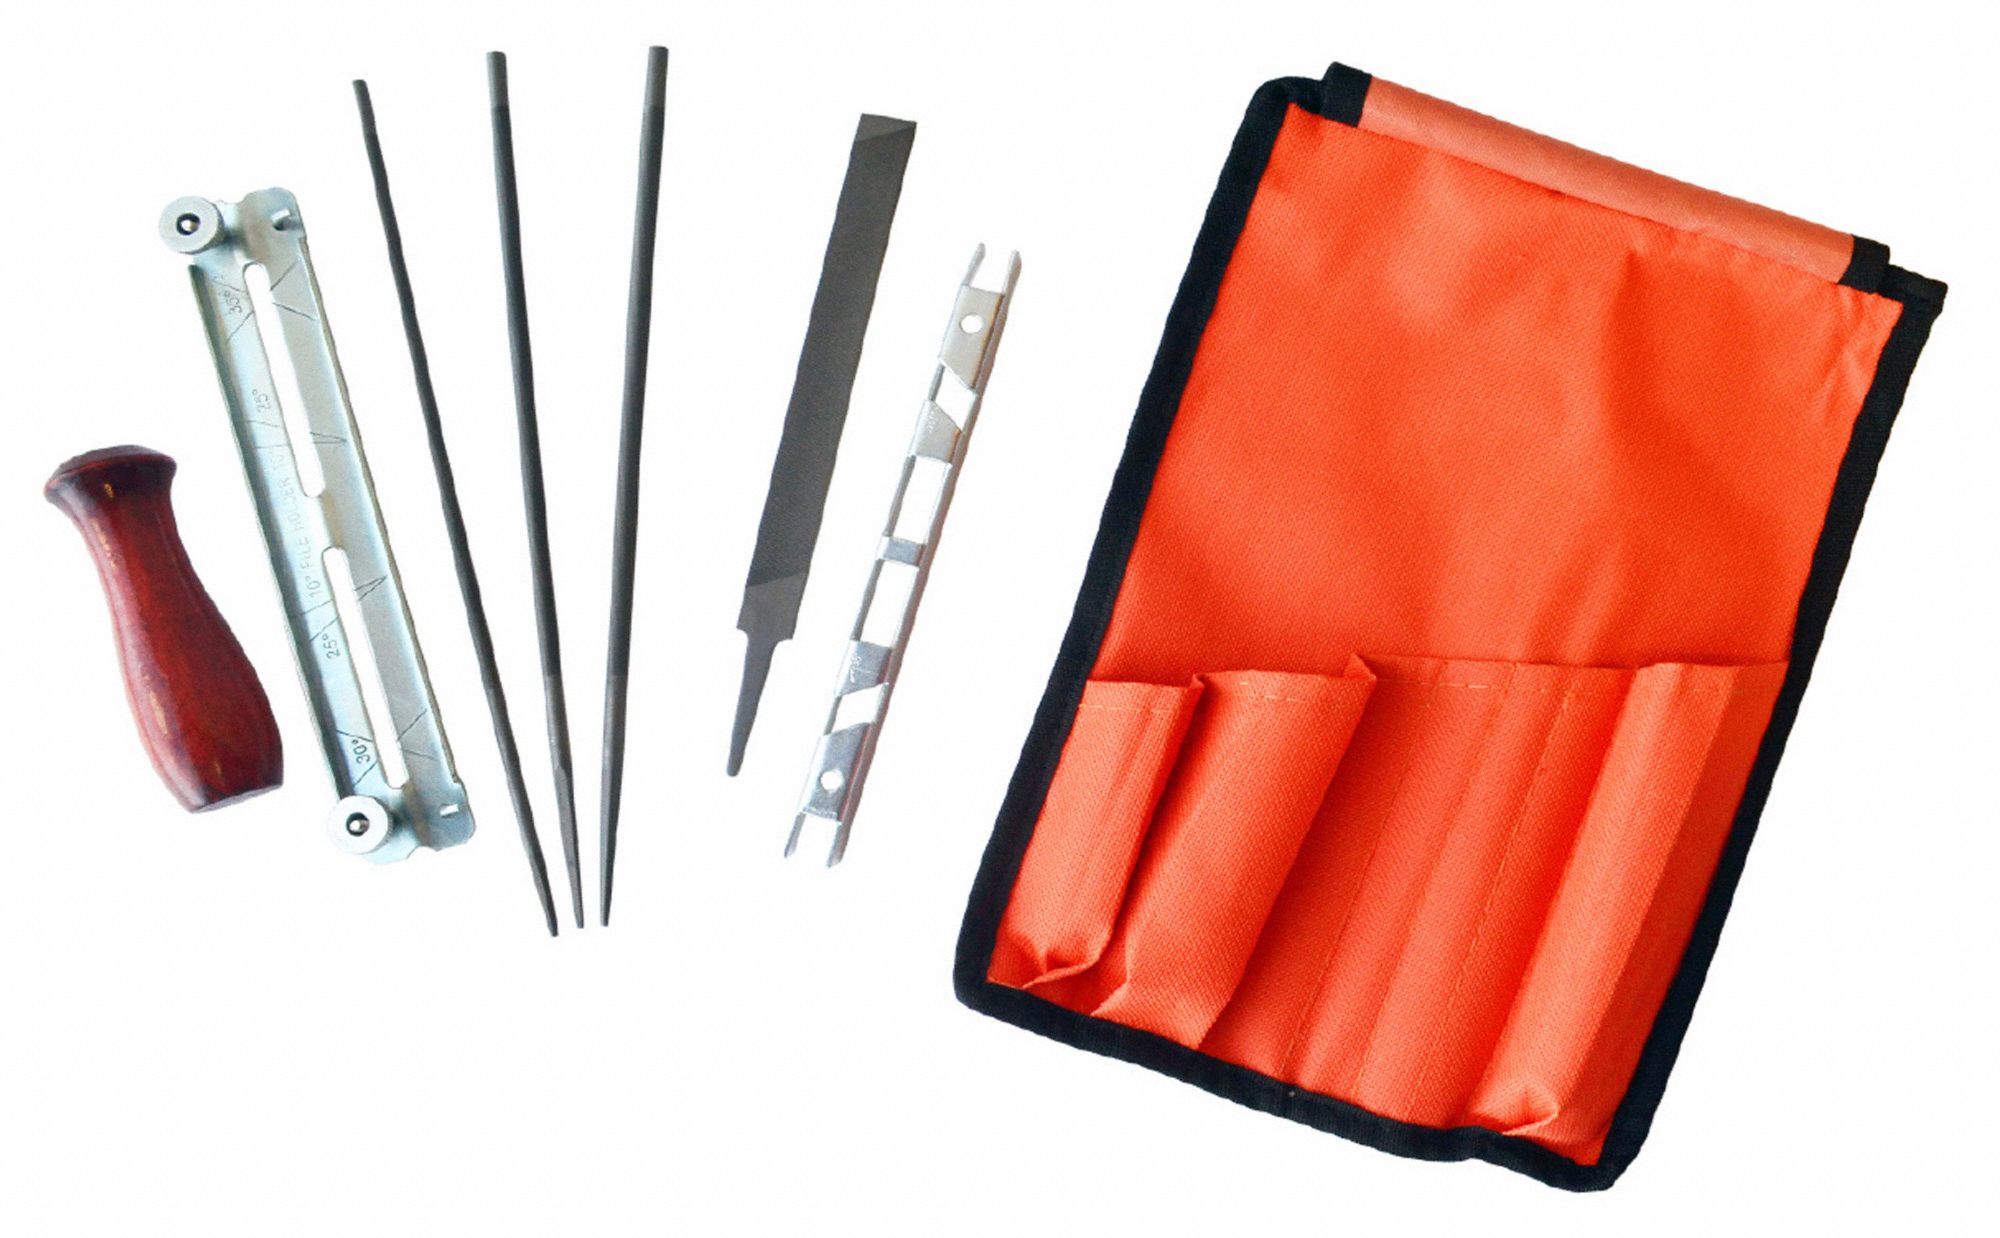 10 13/64 in Solid Pattern Sharpening Field Kit with Chrome Plated Finish; Number of Pieces: 8